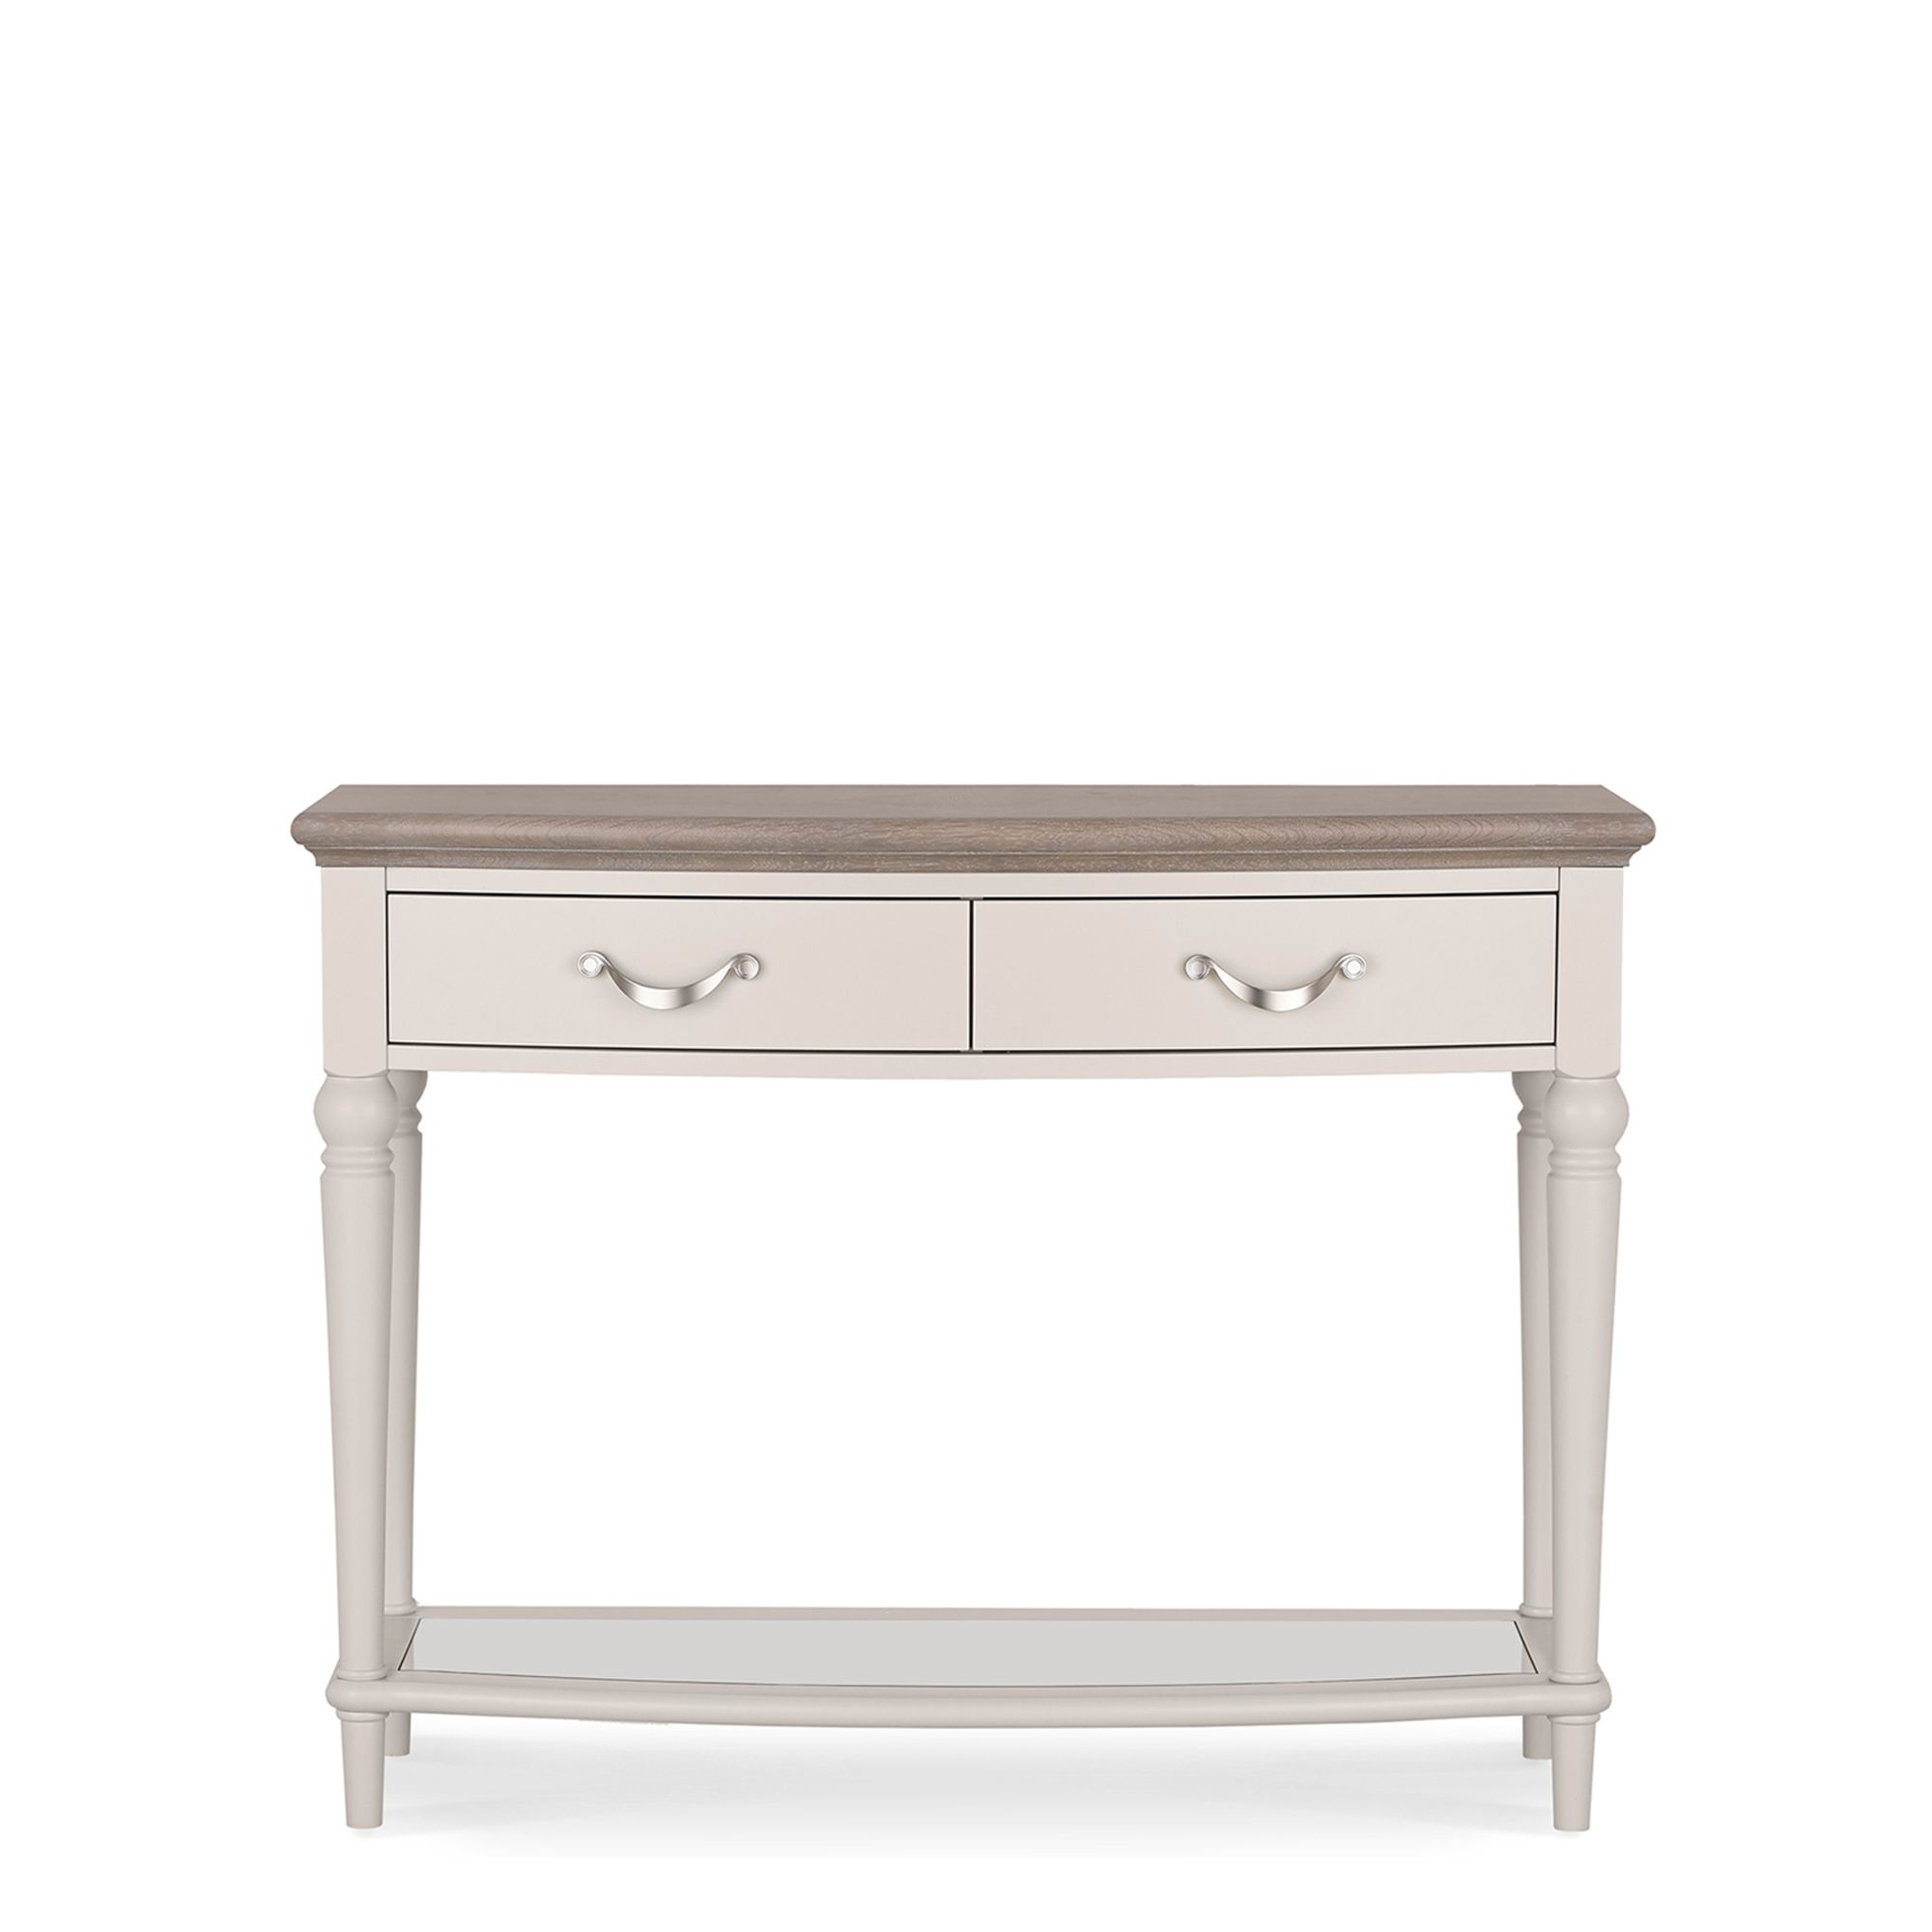 Chateau – Grey Washed Oak Console Table – Fishpools In Gray Wash Console Tables (Gallery 20 of 20)